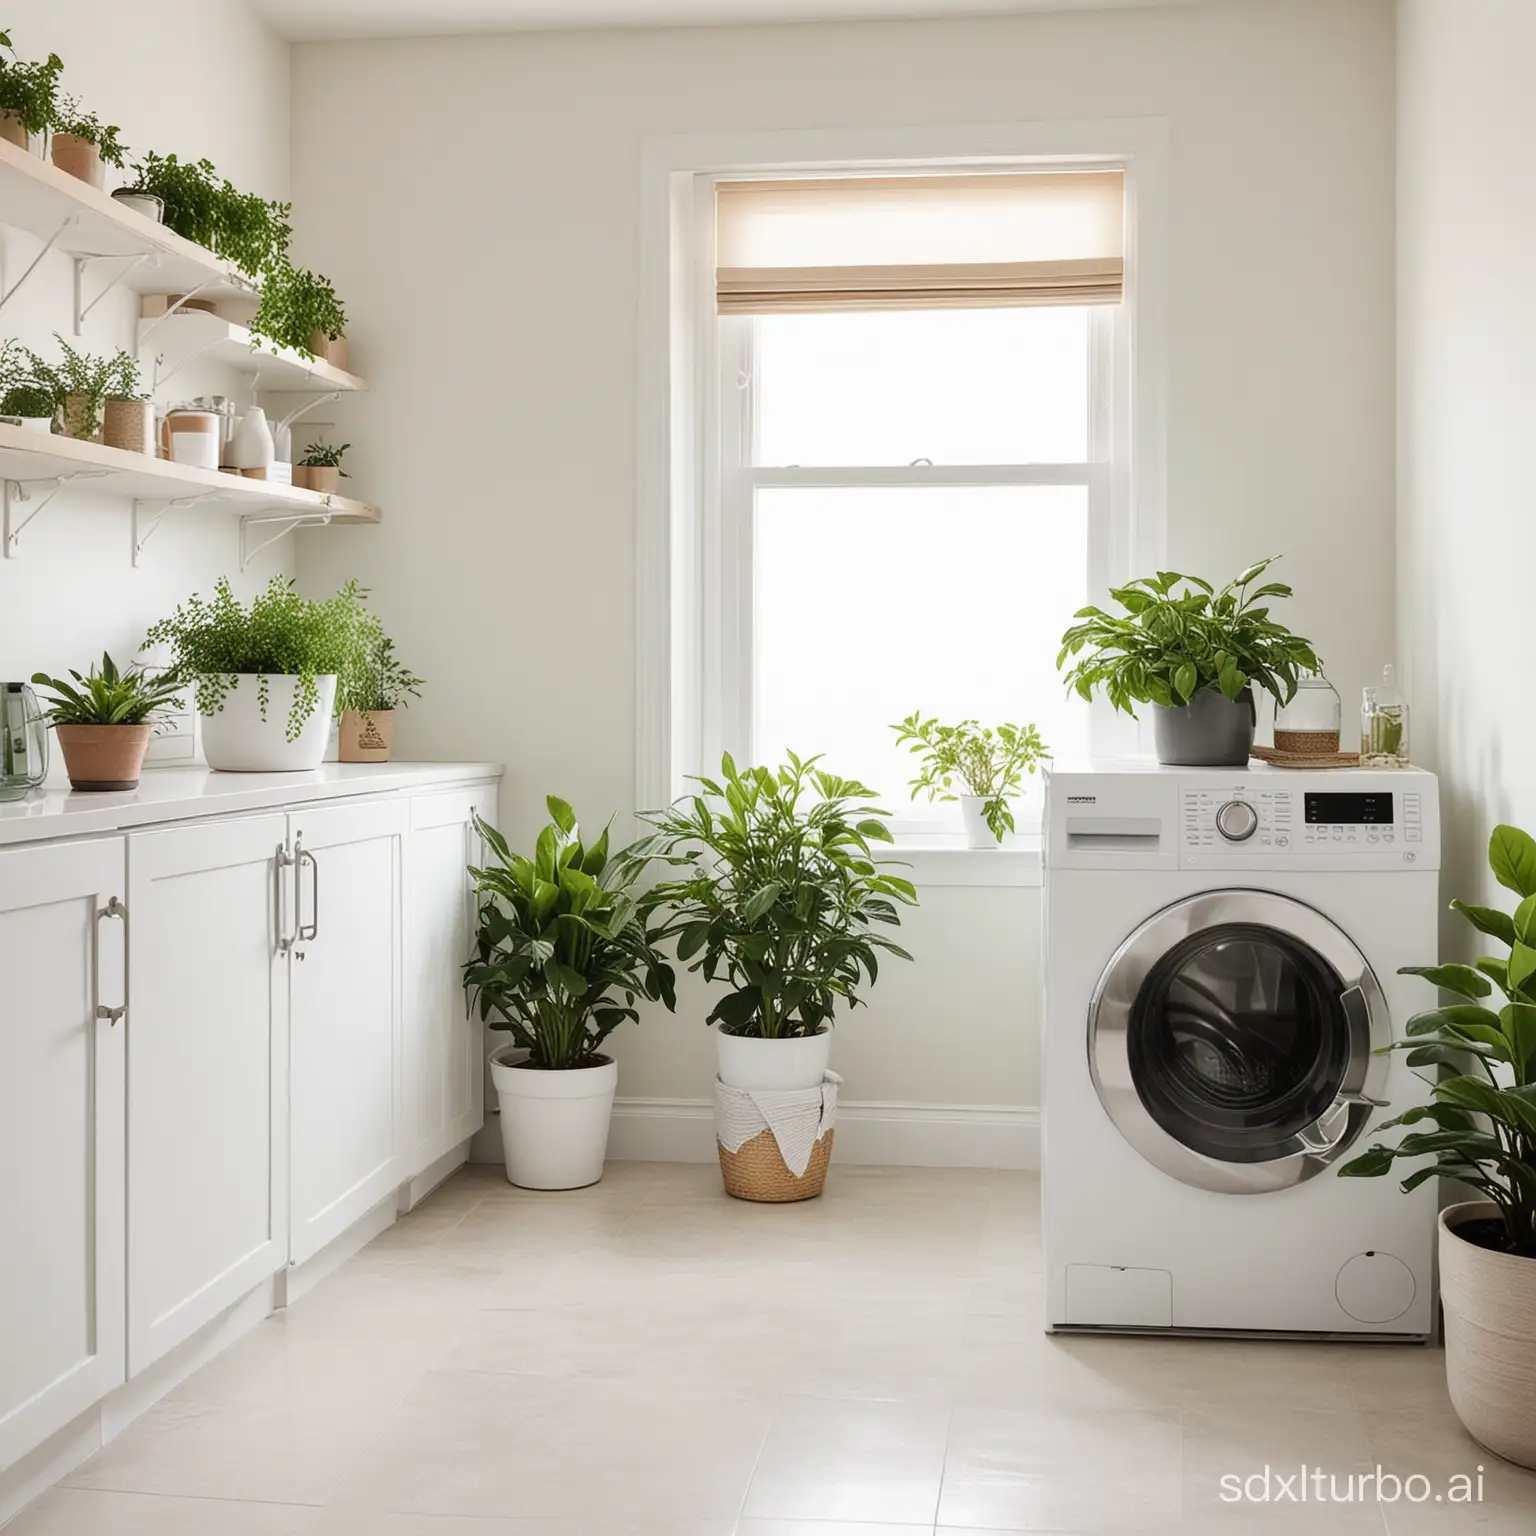 American-style laundry room, including a pot of green plants, a washing machine, light background, minimalist style